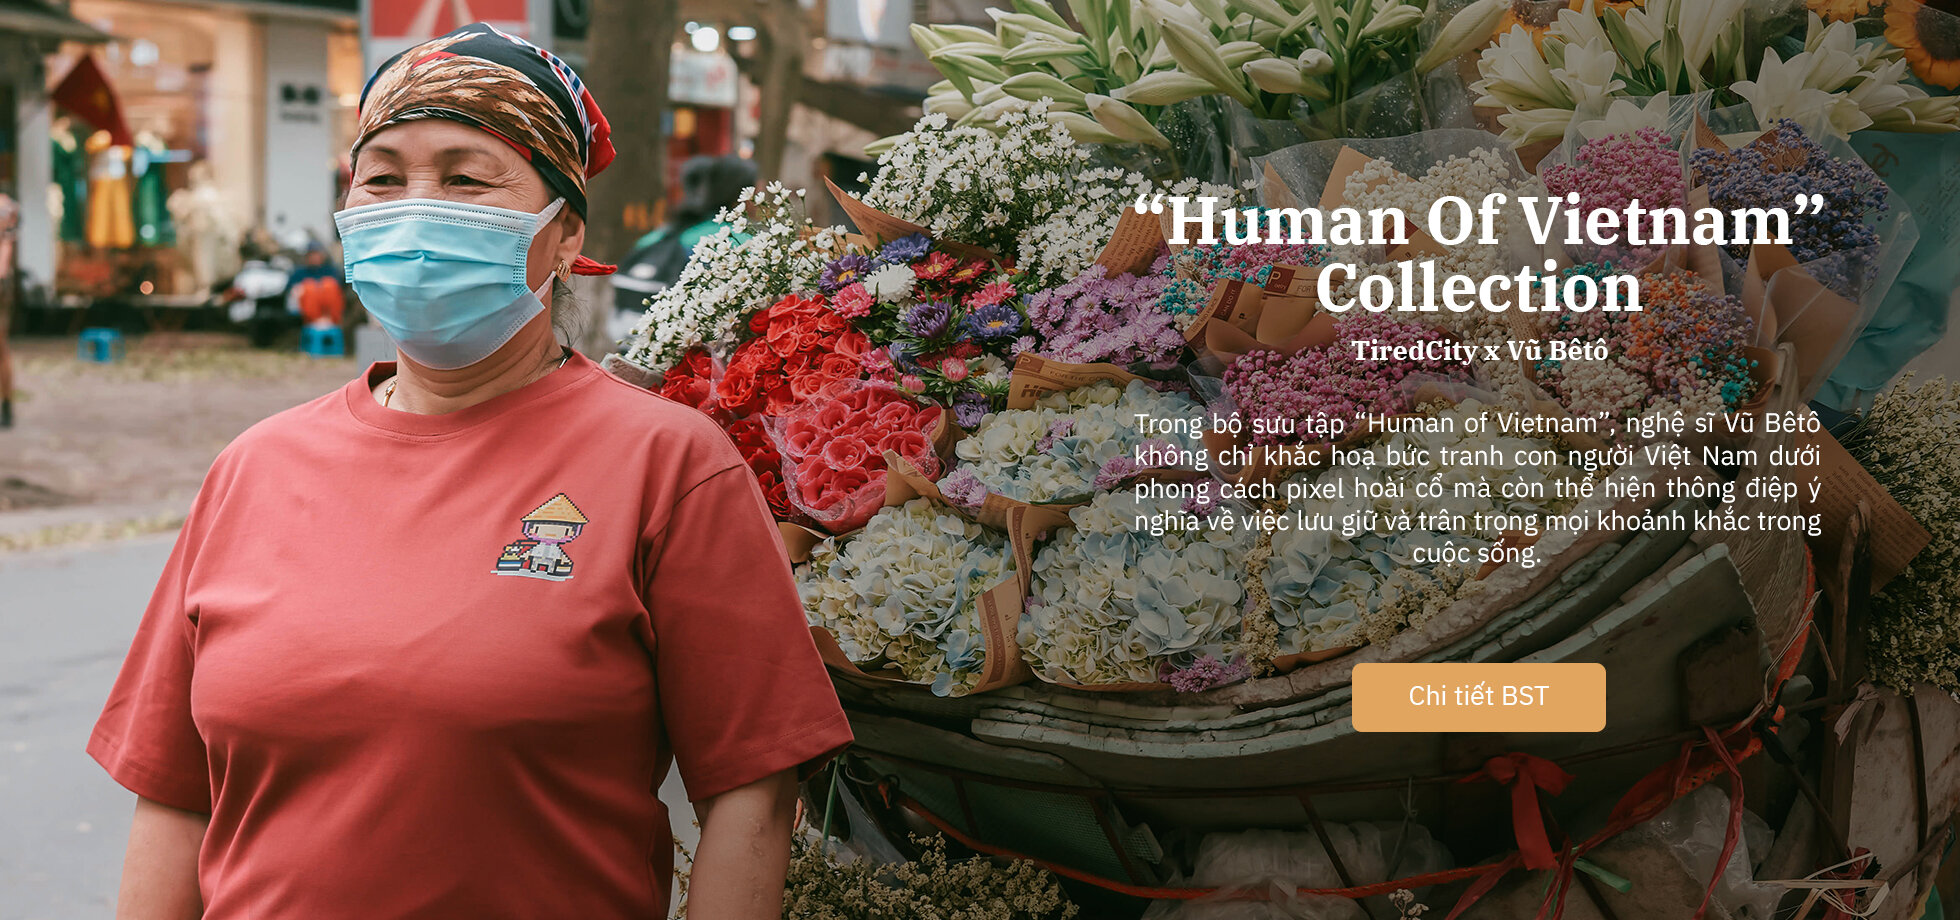 Human of Vietnam Collection